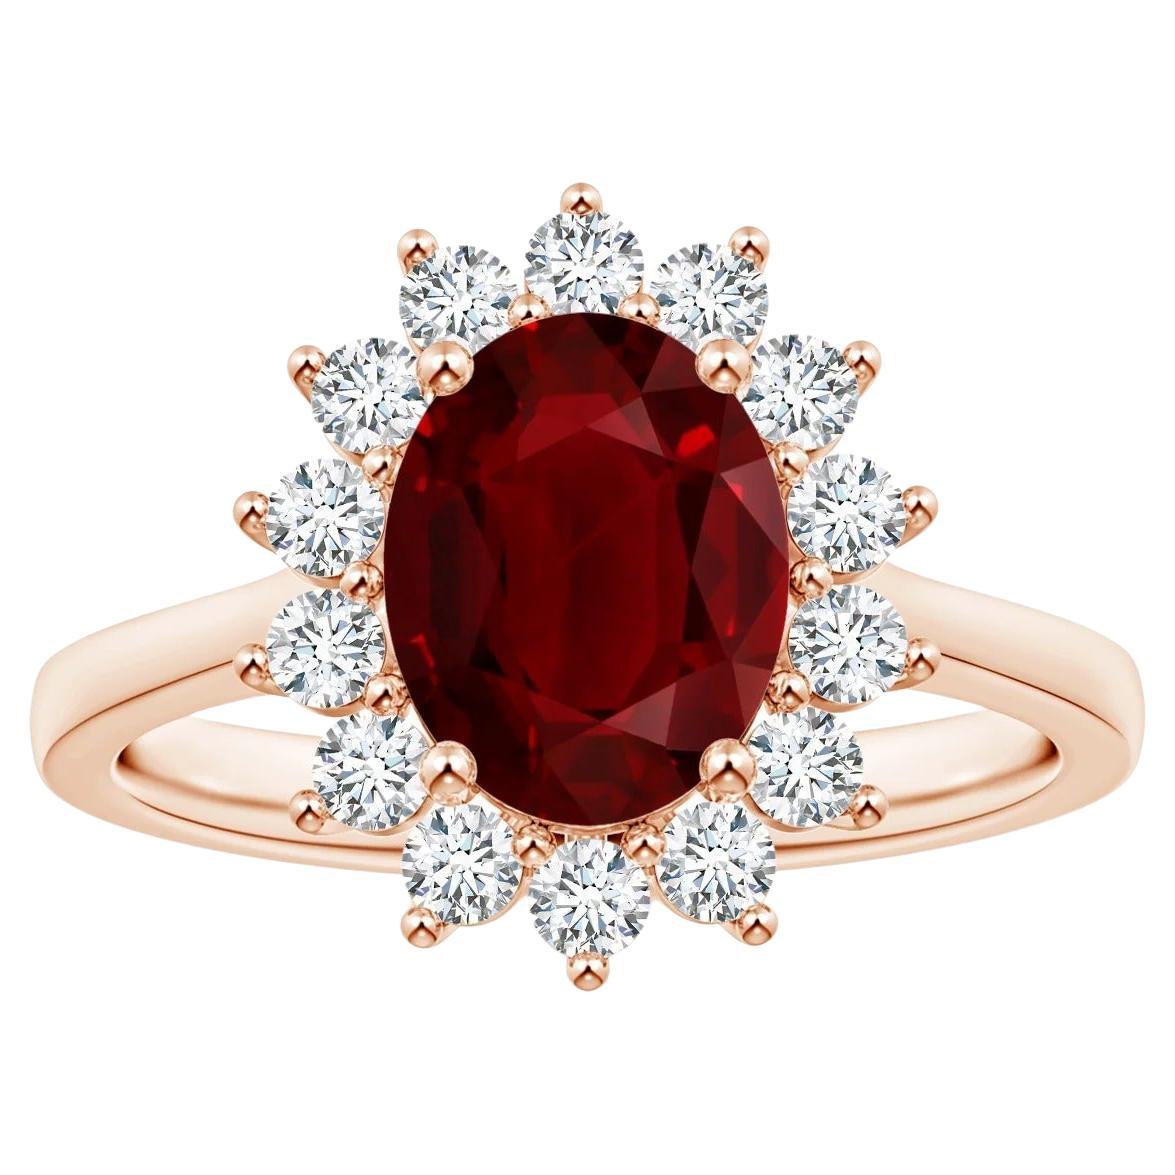 For Sale:  Angara Gia Certified Ruby Princess Diana Inspired Halo Ring in Rose Gold